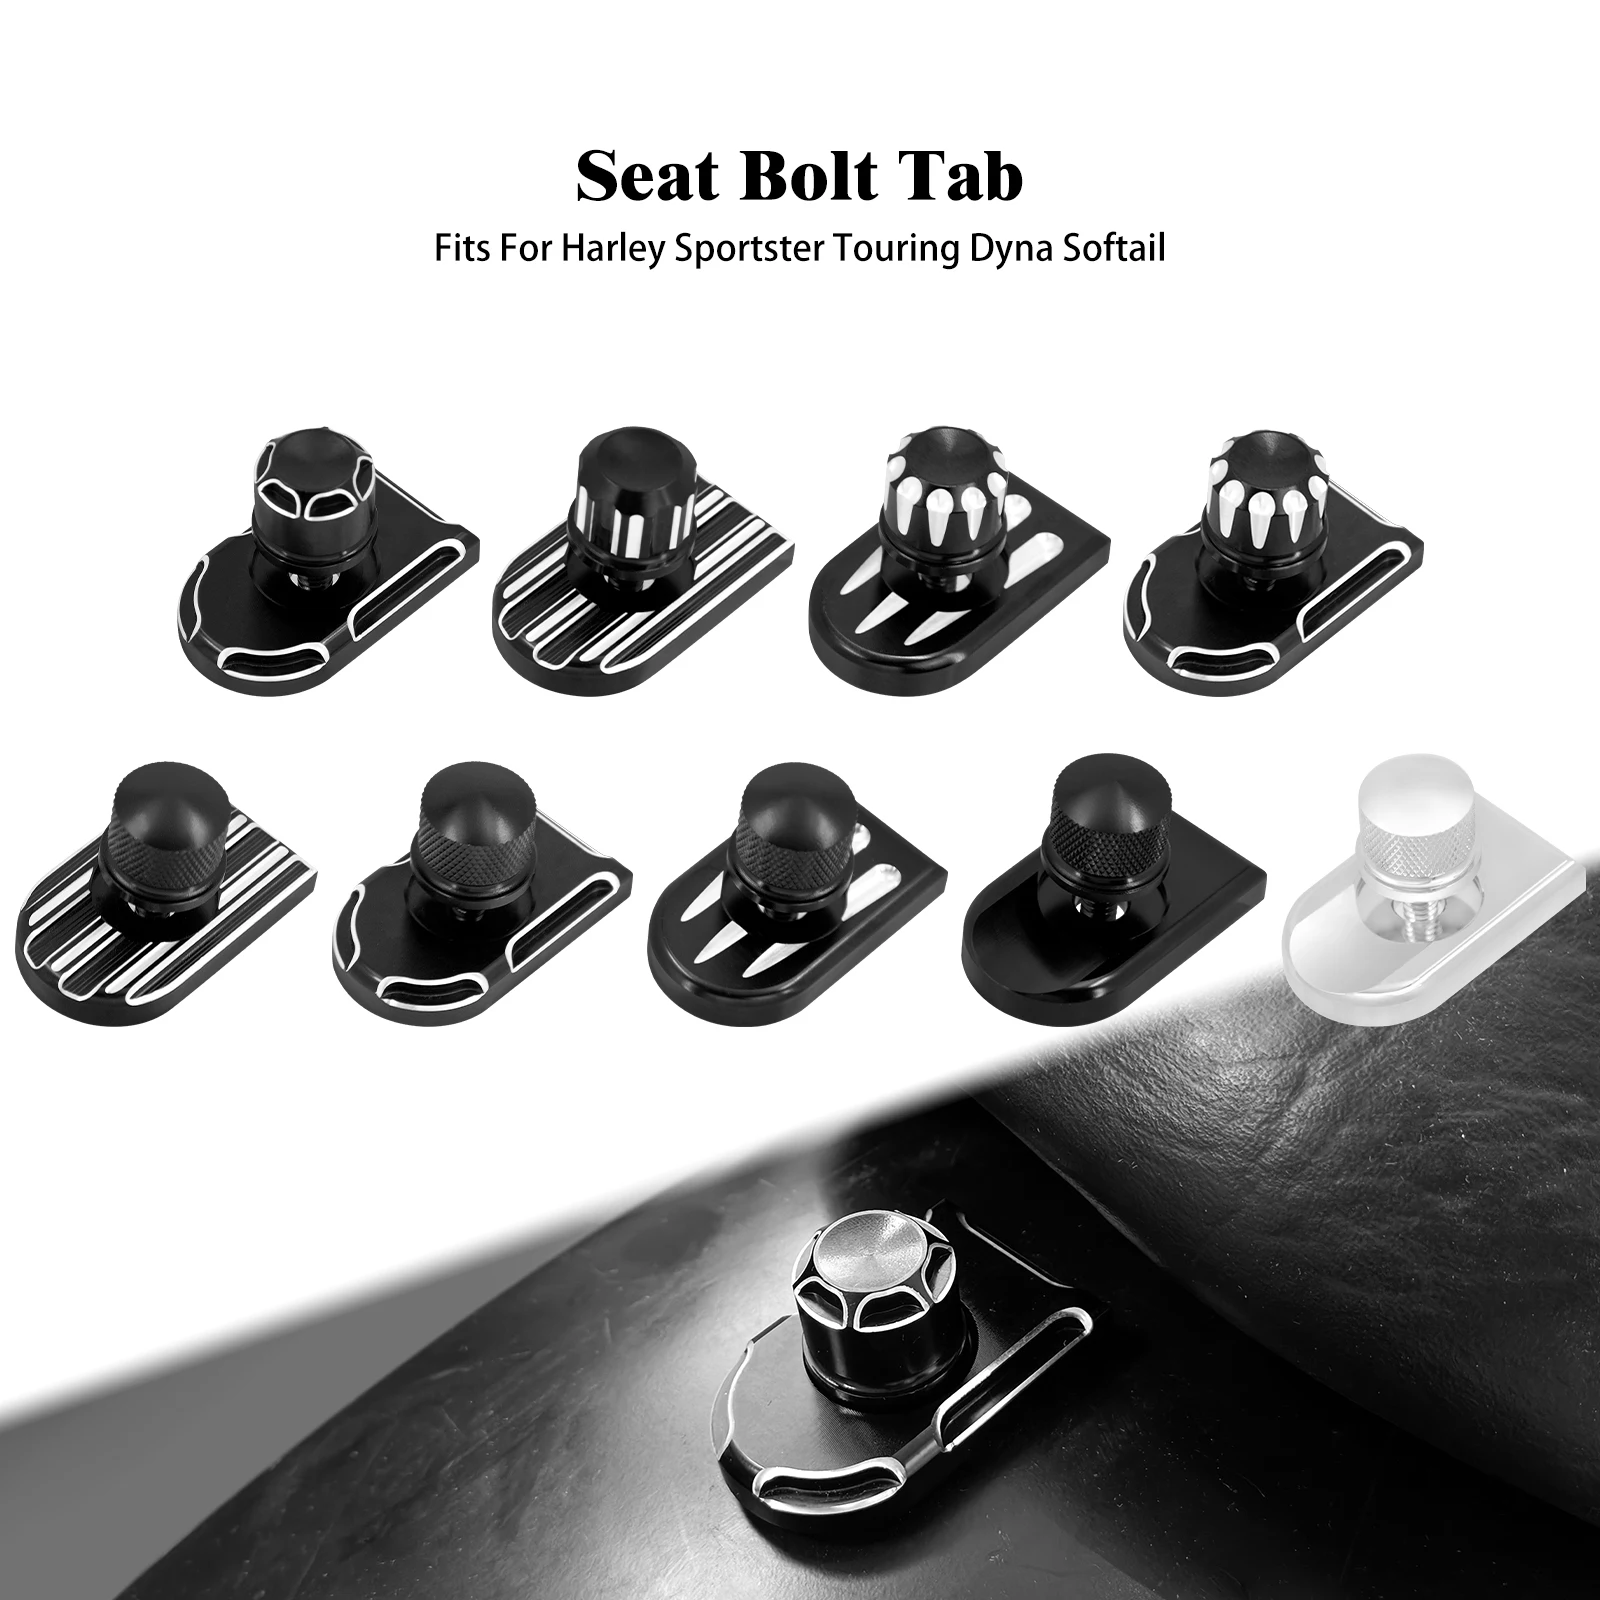 

Universal Motorcycle Rear Fender Seat Bolt Screw Nut Tab Kit Mount Knob Cover Set For Harley Softail Touring Sportster XL Dyna